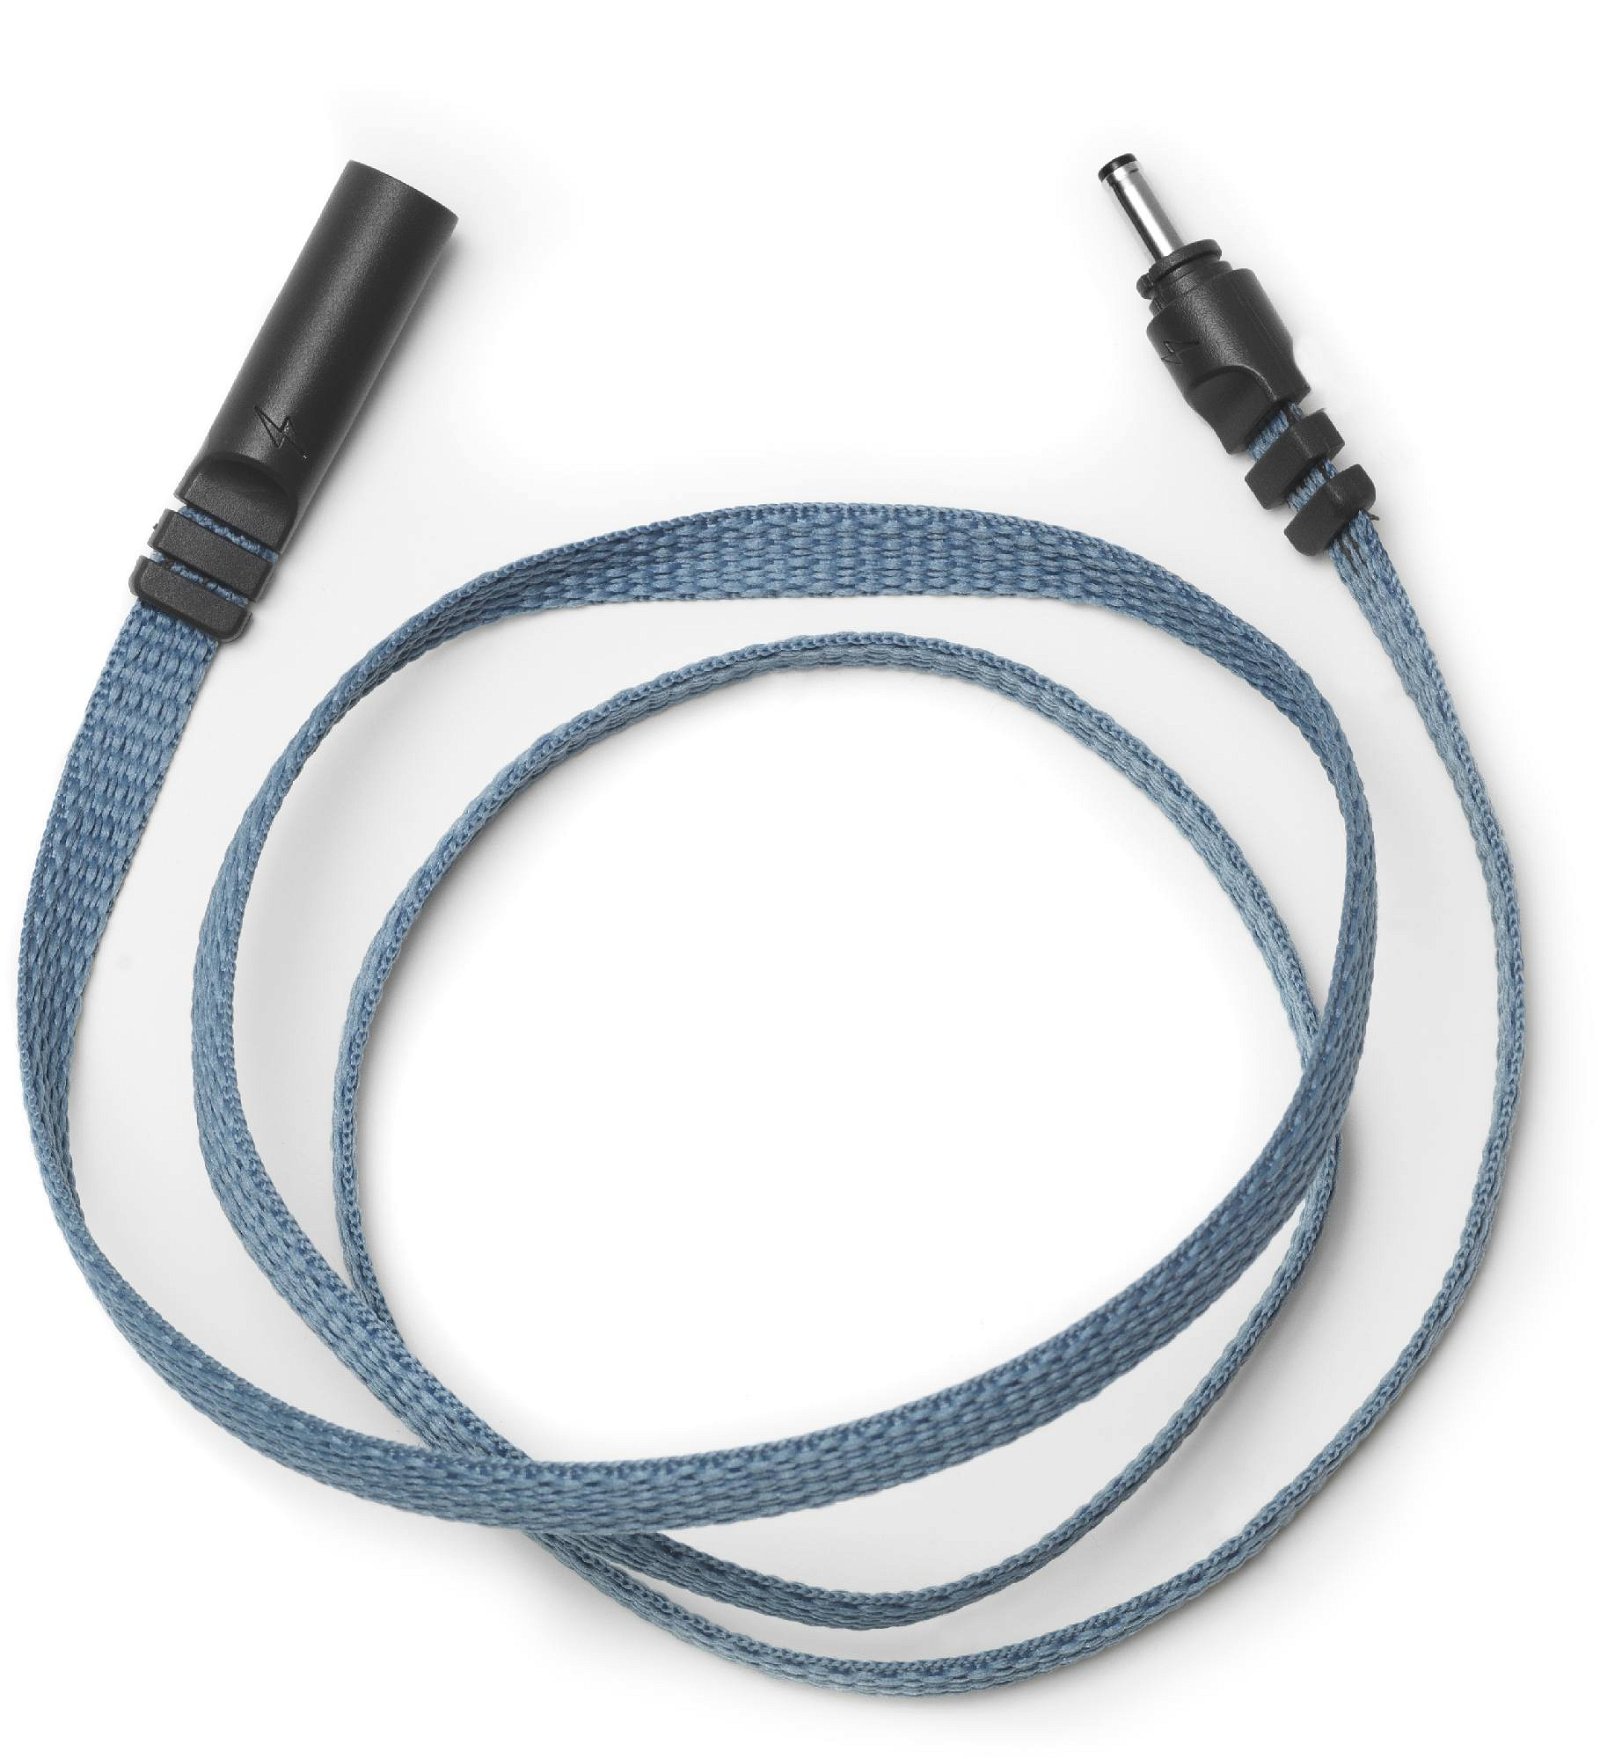 Silva Trail Runner Free Extension Cable